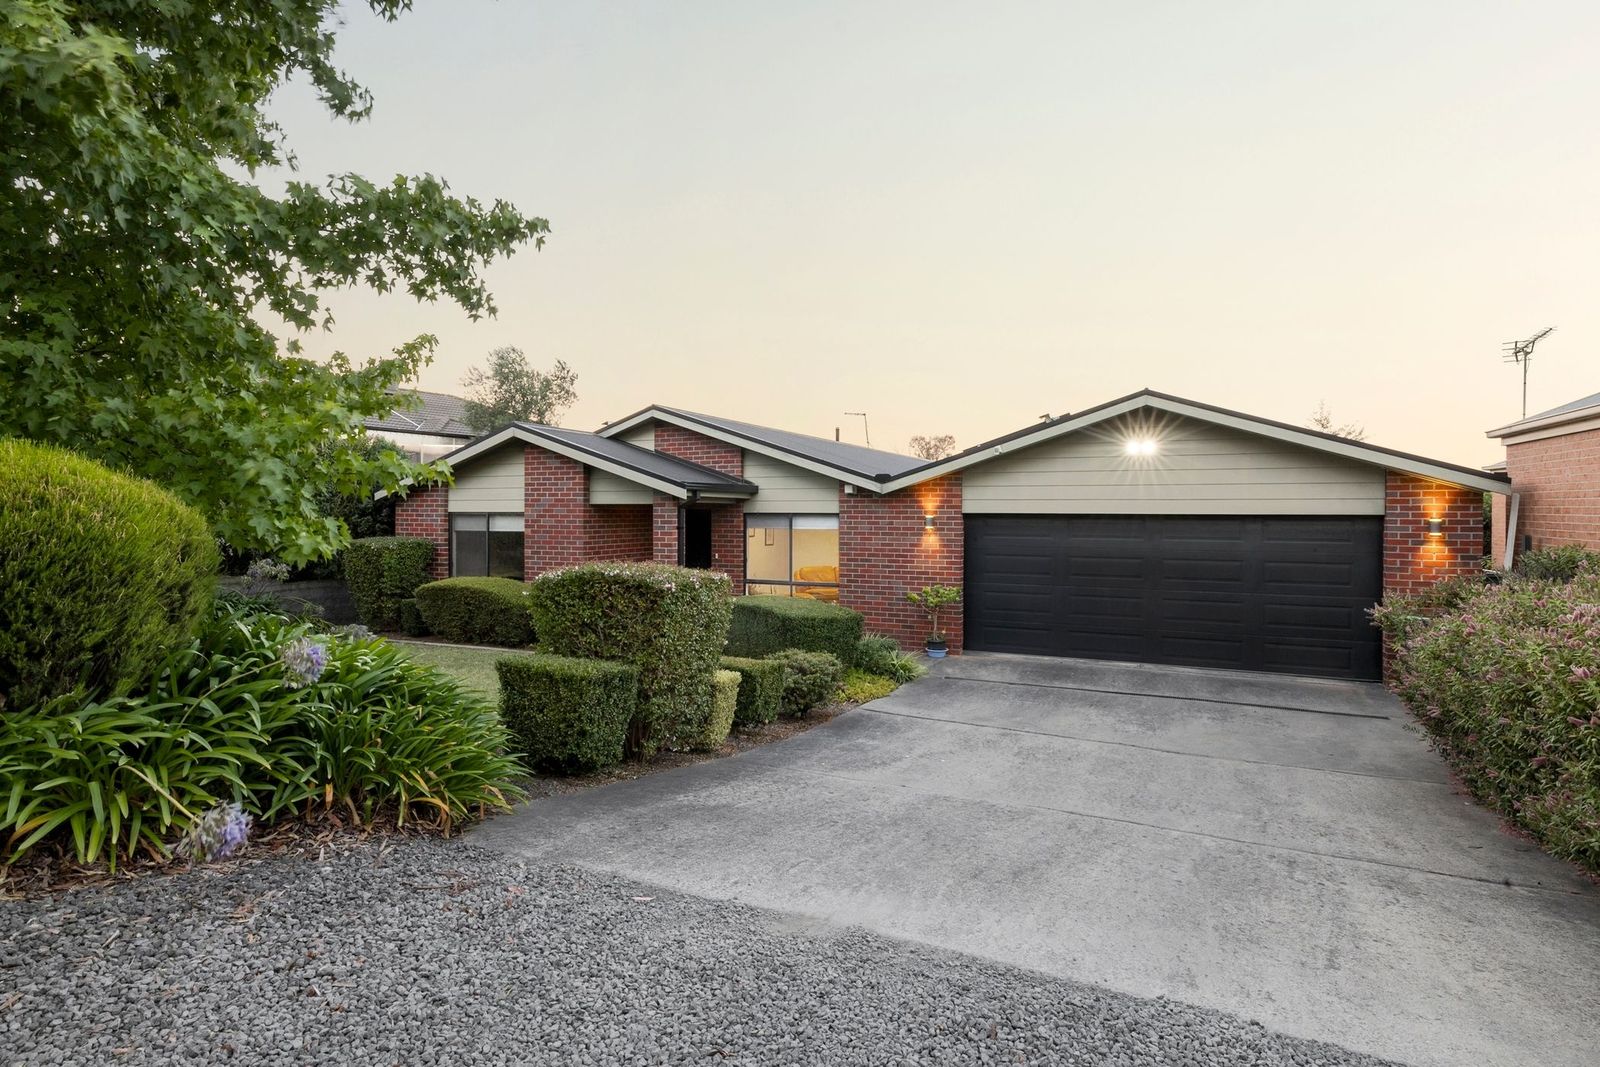 429 Tinworth Avenue, Mount Clear VIC 3350, Image 0